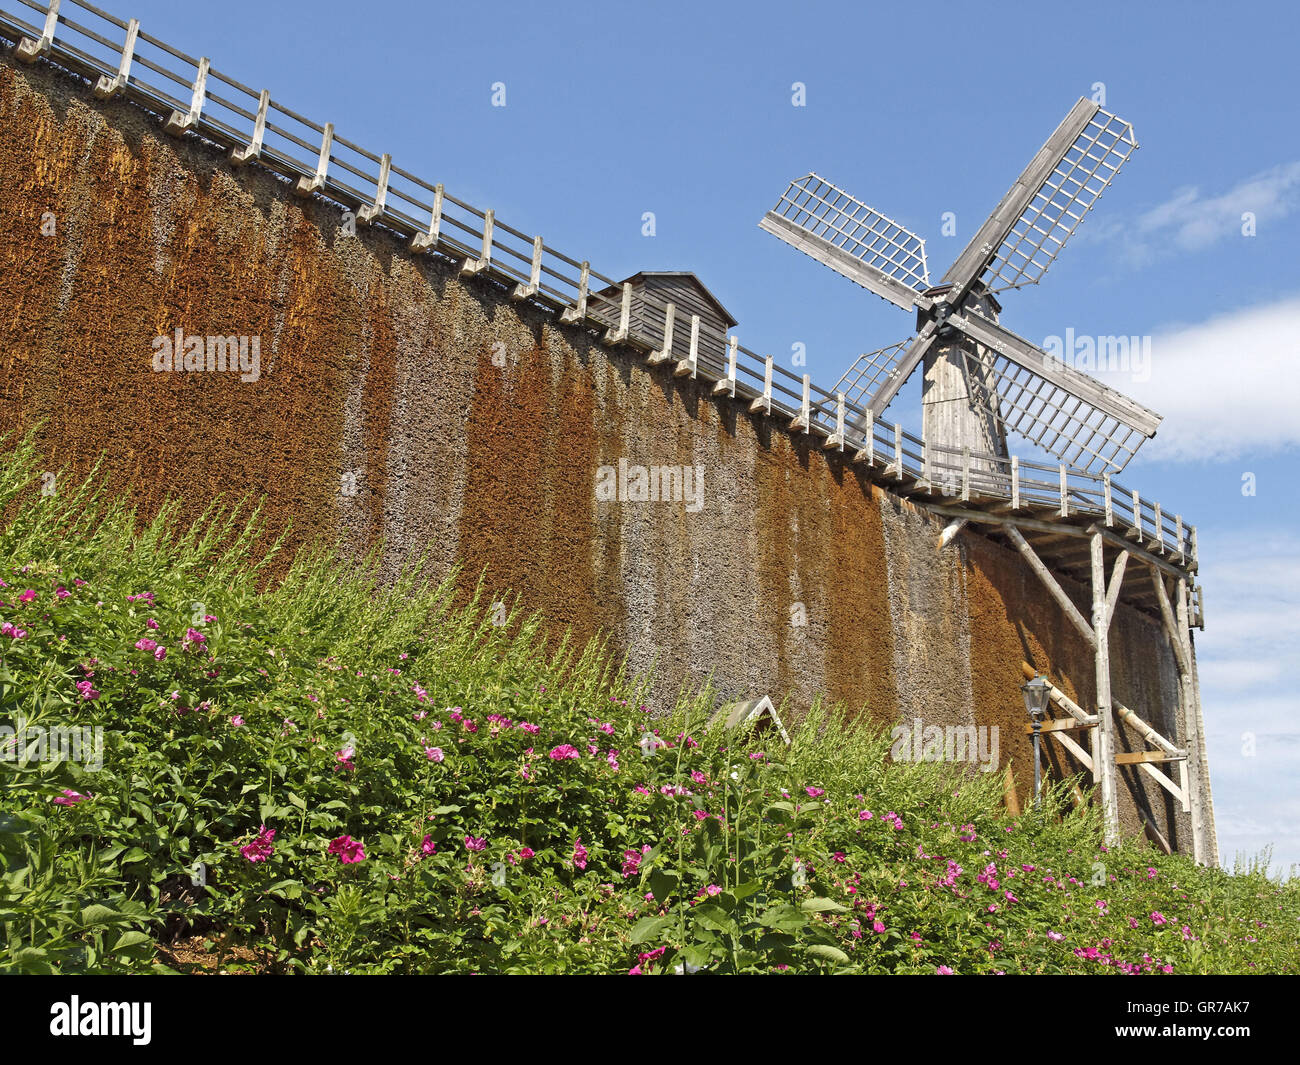 Bad Rothenfelde, Salt-Works With Windmill In The Spa Garden, Osnabruecker Land, Lower Saxony, Germany Stock Photo